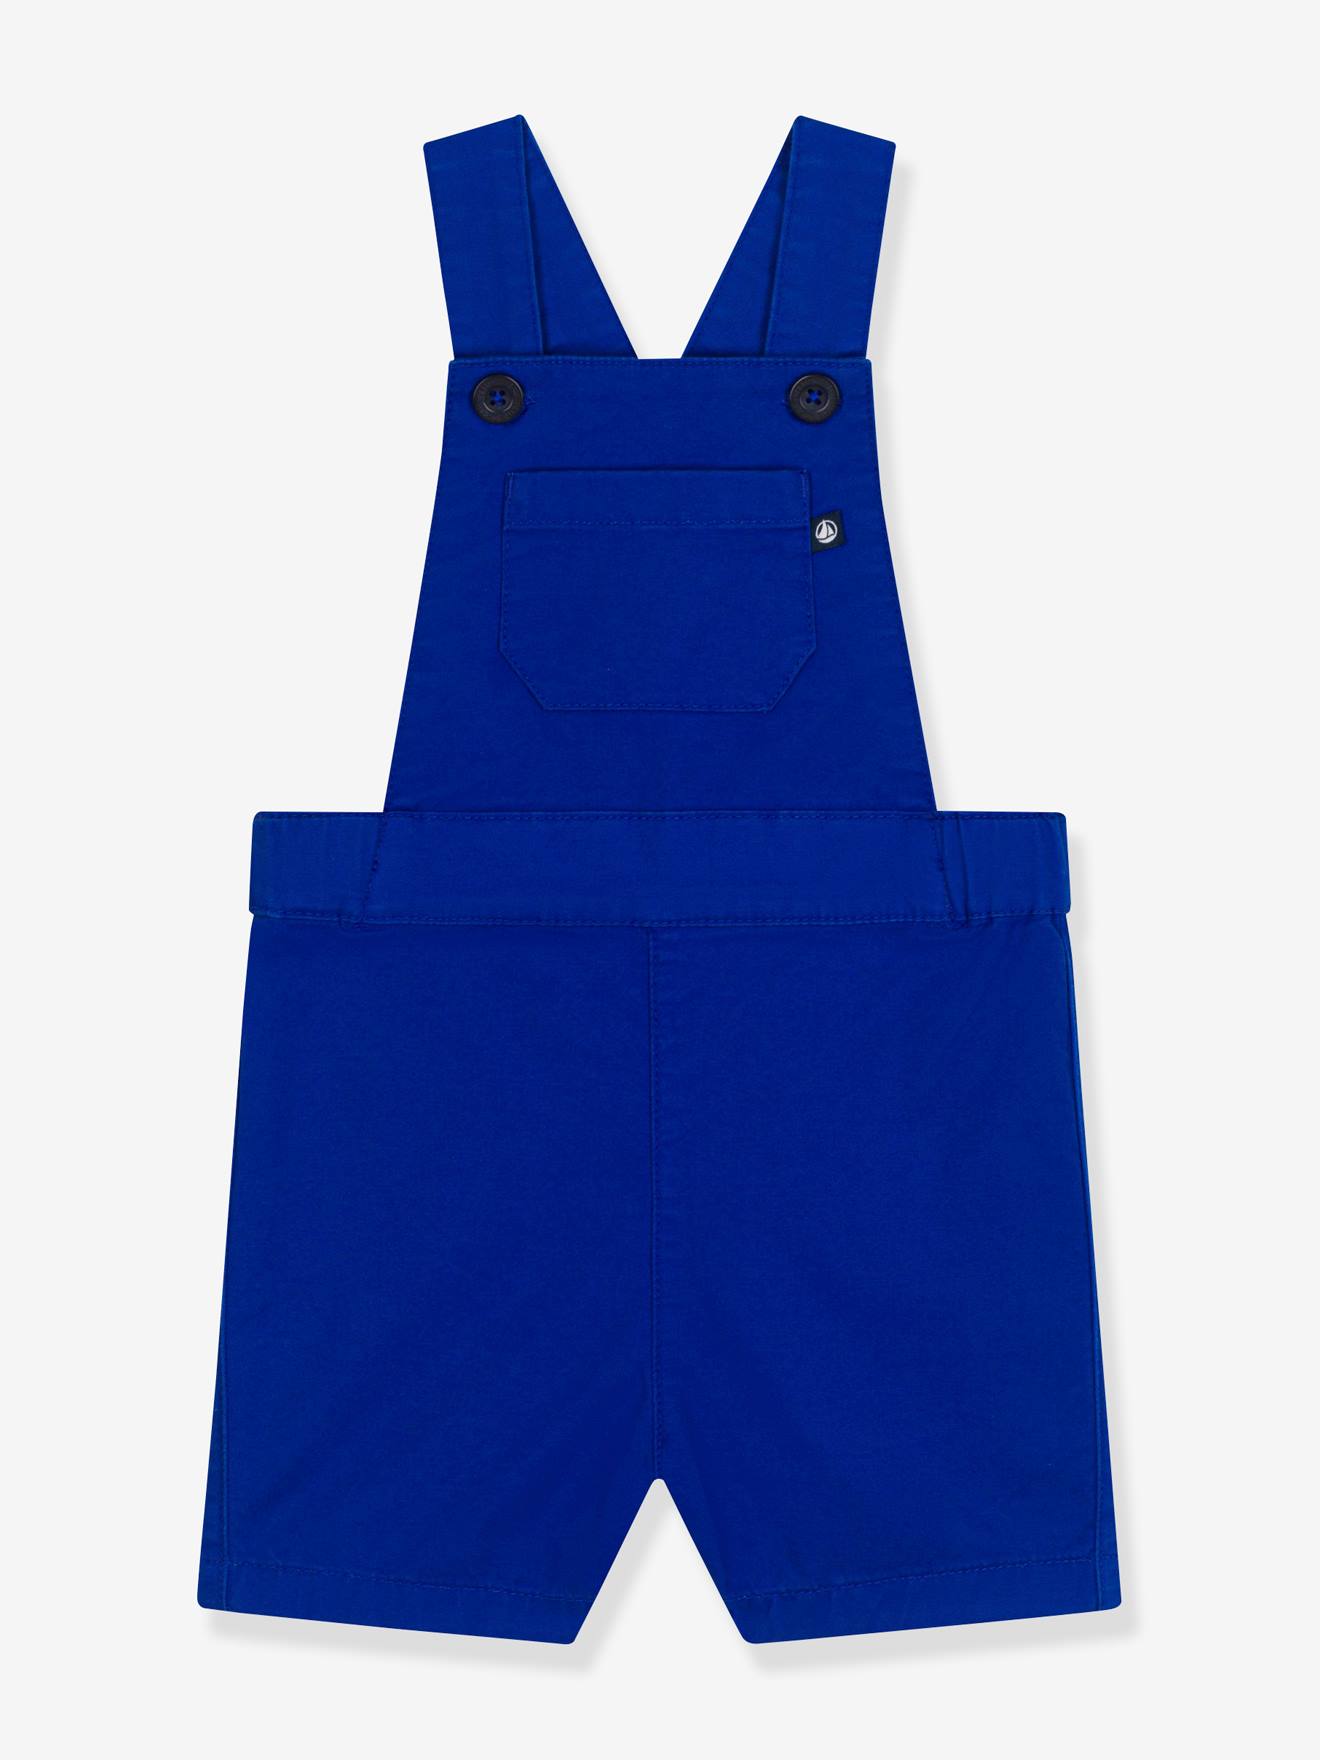 Short Dungaree for Babies by PETIT BATEAU navy blue